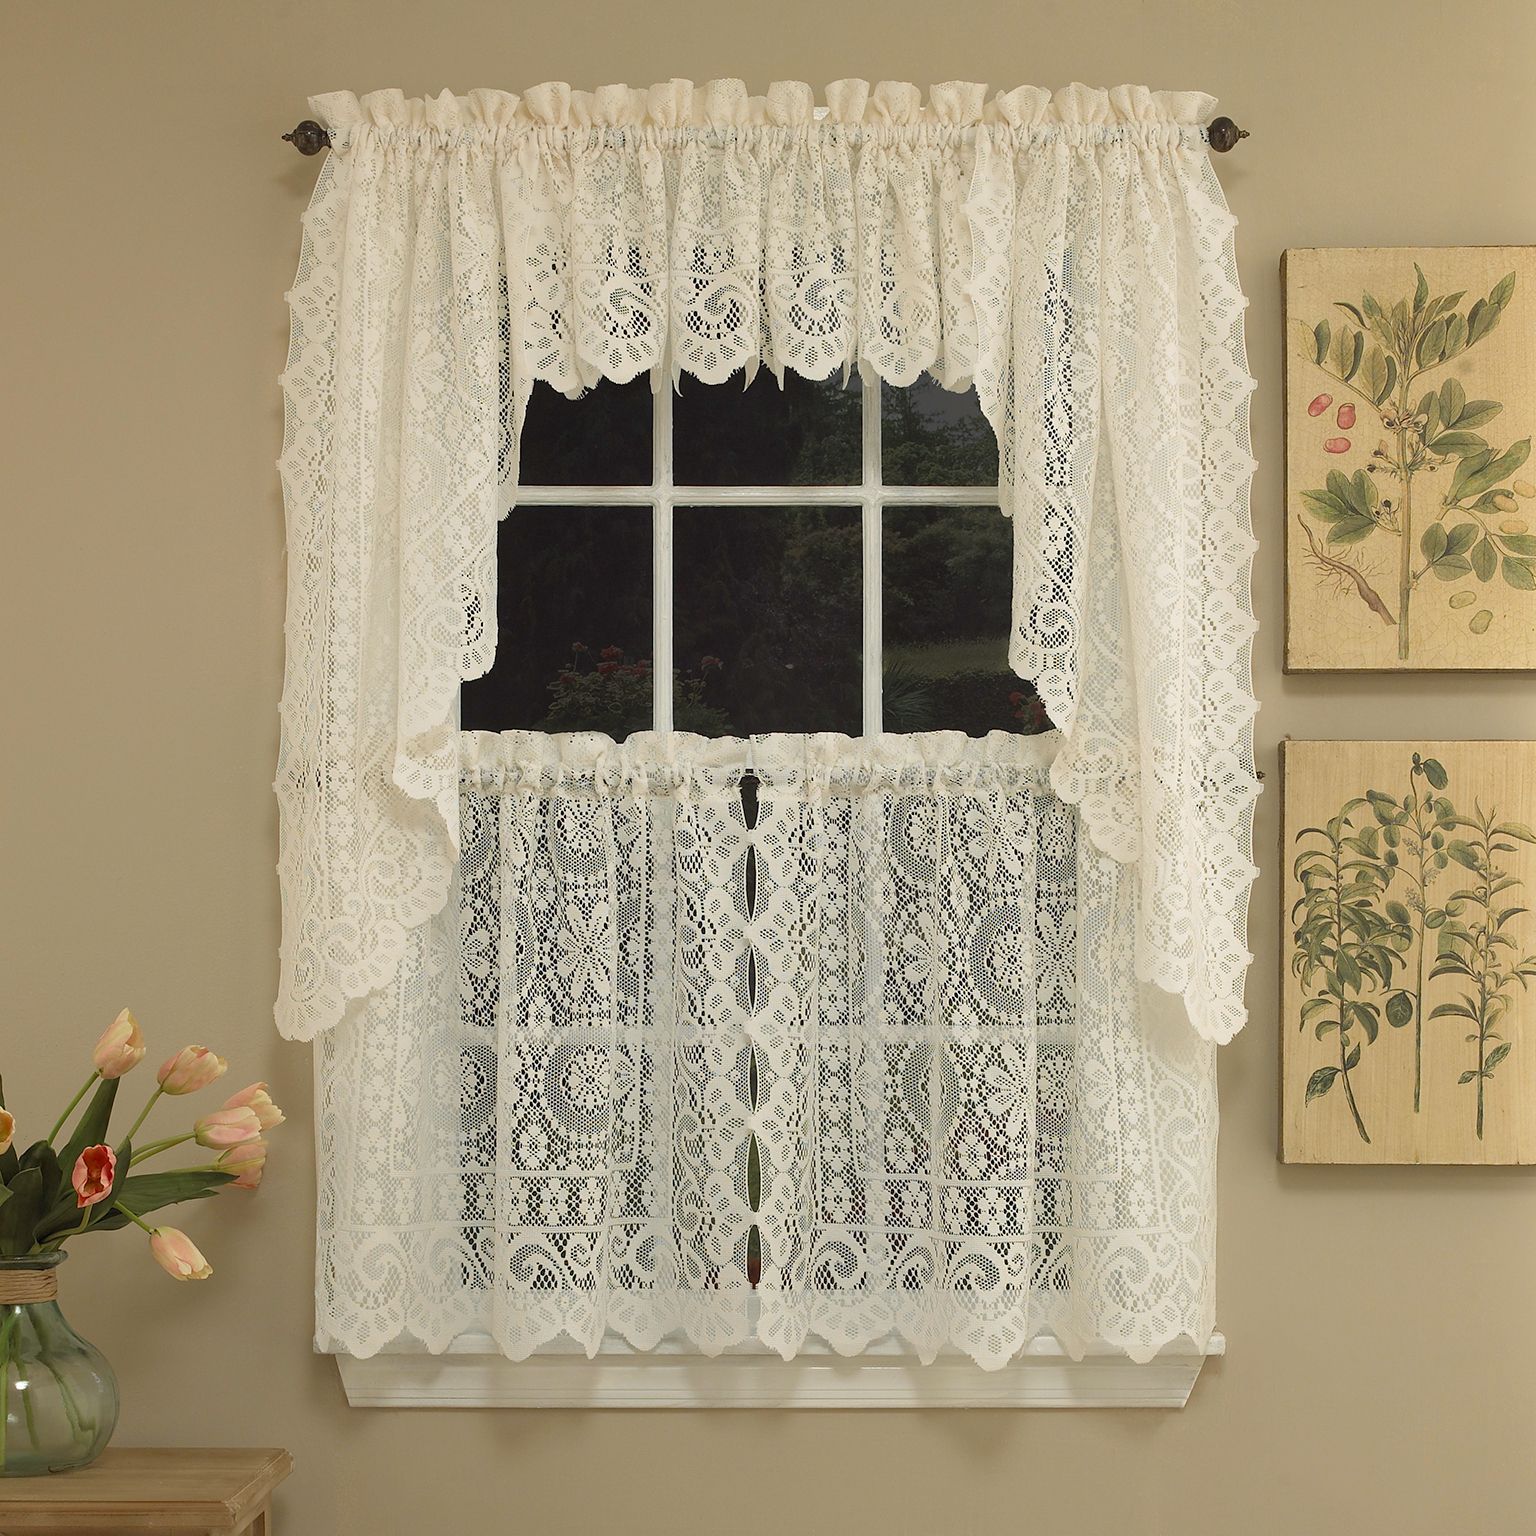 Details About Hopewell Heavy Cream Lace Kitchen Curtain Choice Of Tier  Valance Or Swag With Elegant White Priscilla Lace Kitchen Curtain Pieces (Photo 12 of 20)